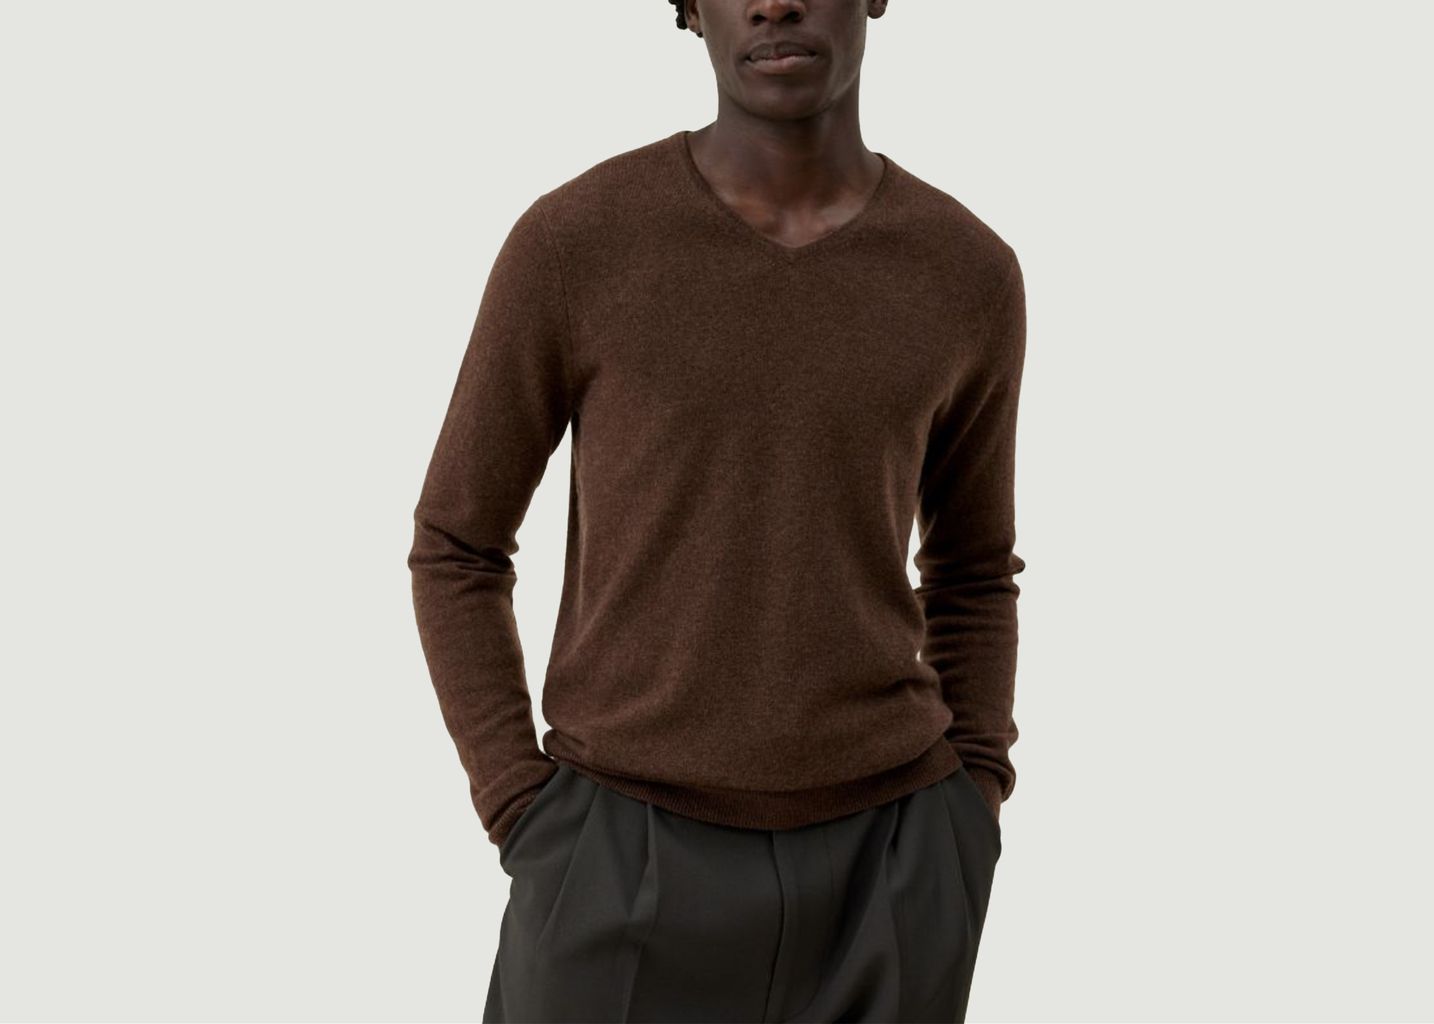 Alagh cashmere sweater - Hircus